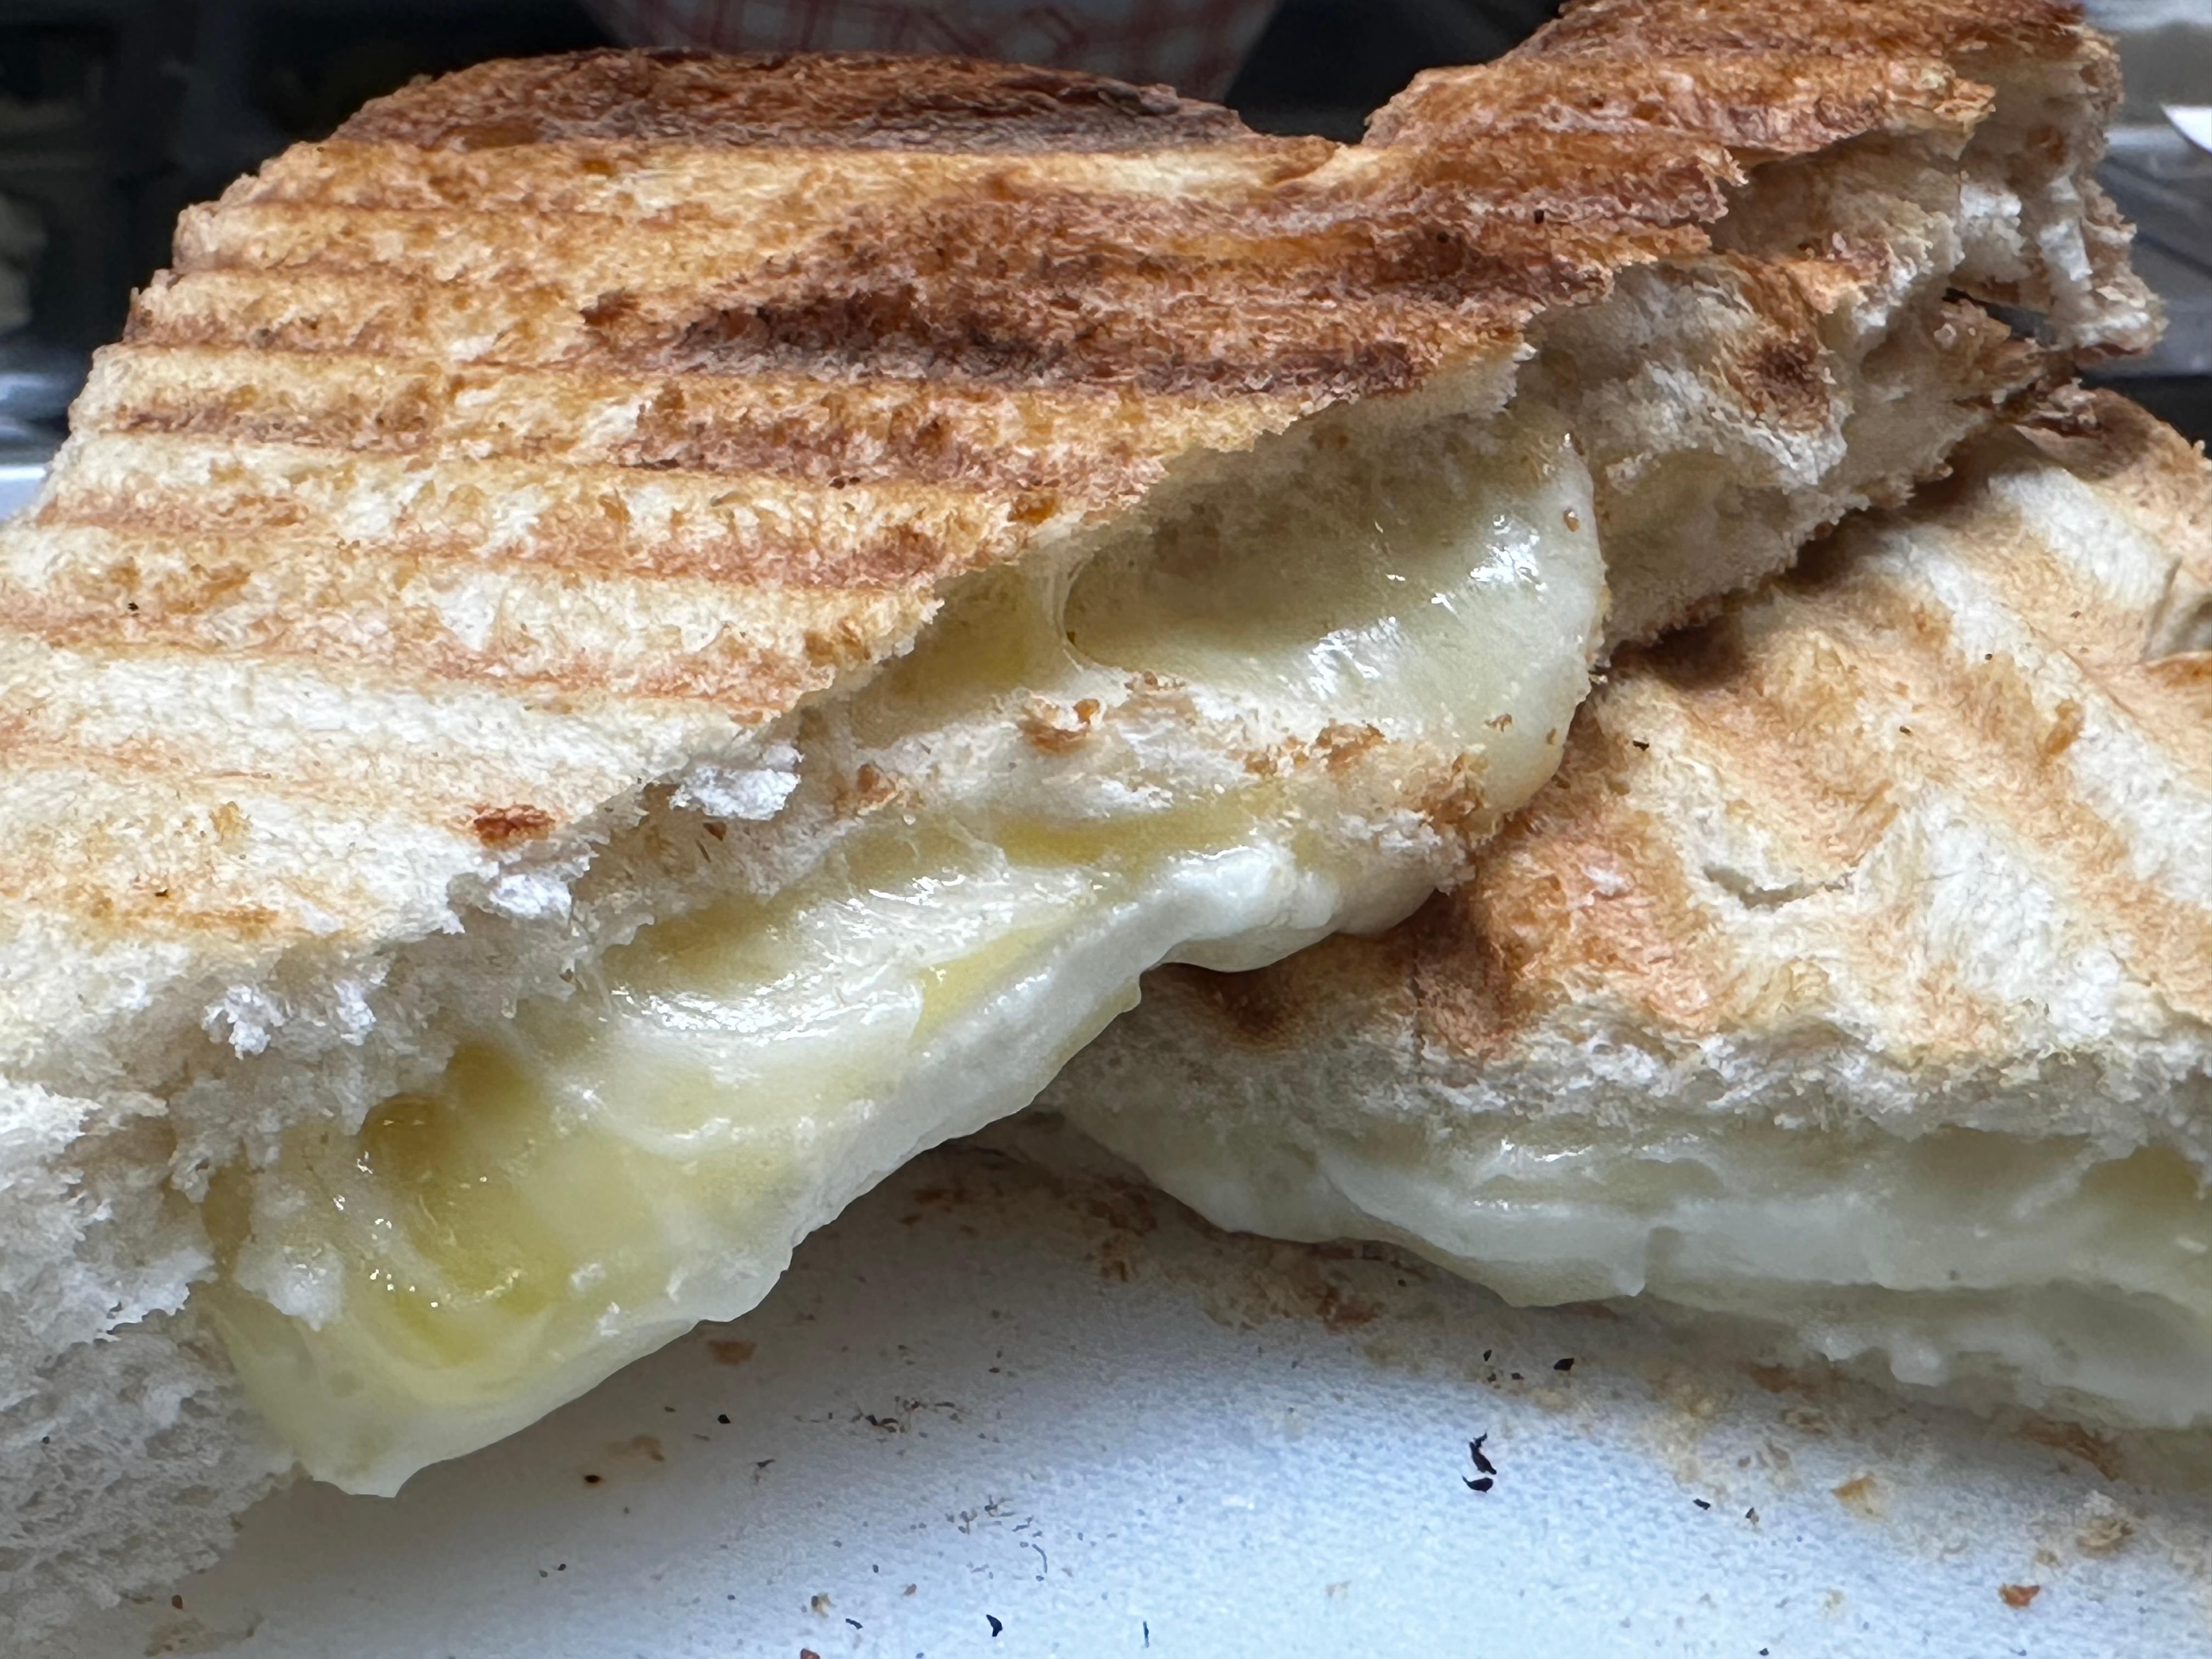 PANINI - 3 CHEESE DELUXE GRILLED CHEESE (cheddar, mozzarella, and provolone on italian)